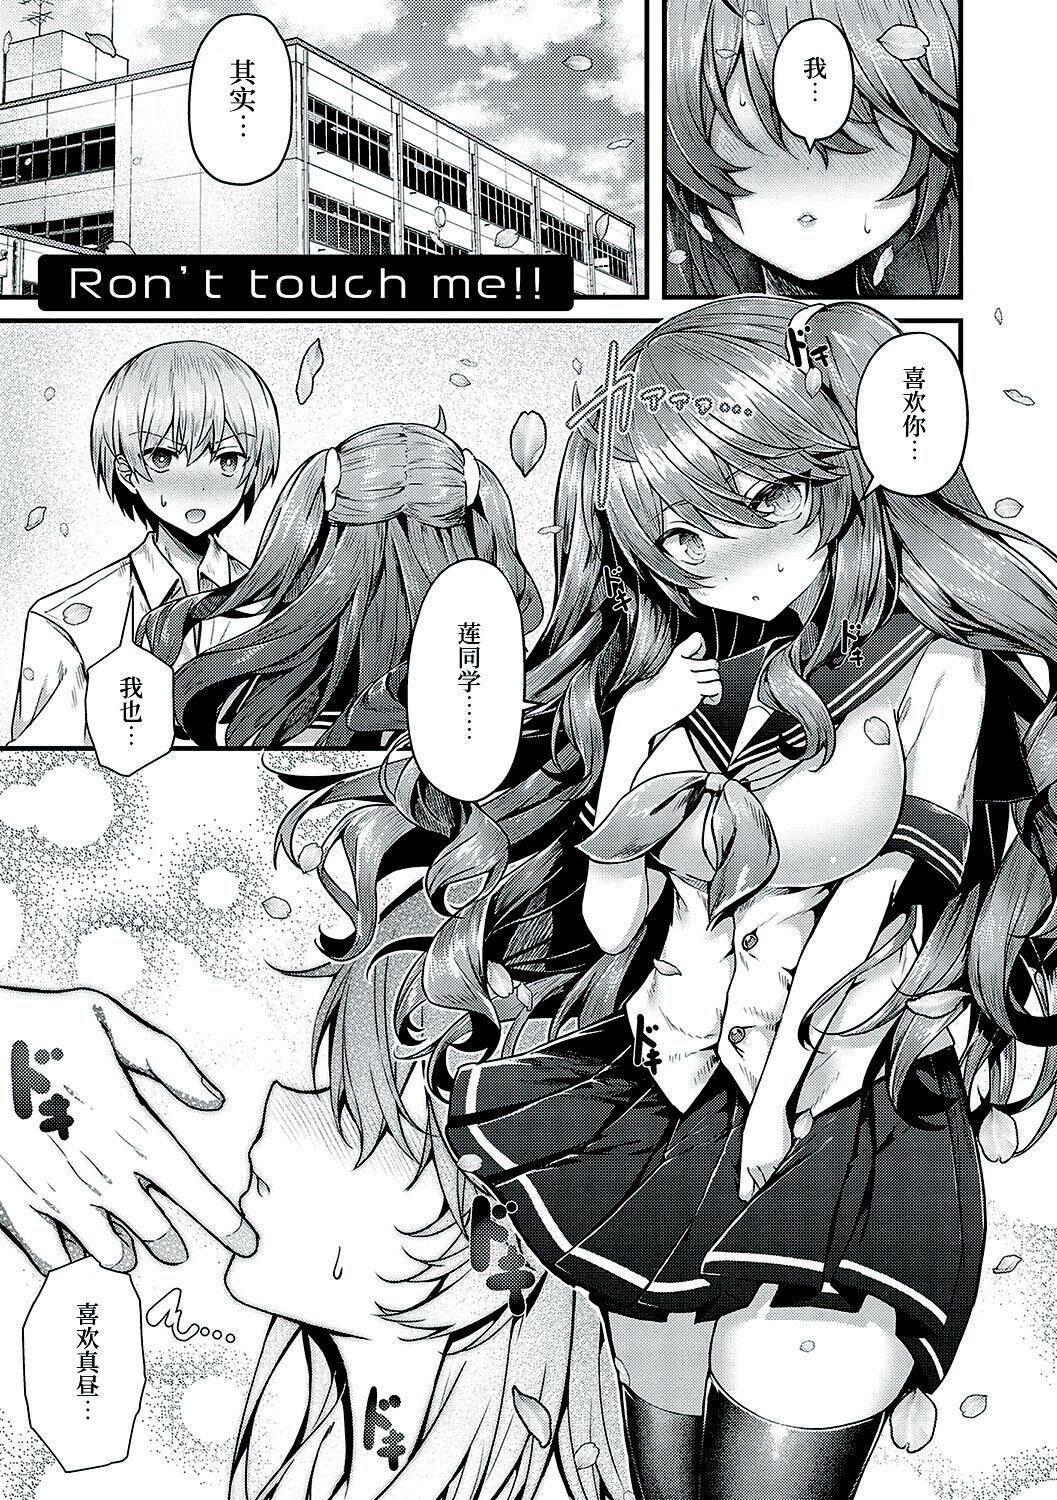 Ron't touch me!! [うこ] [中国翻訳] 0